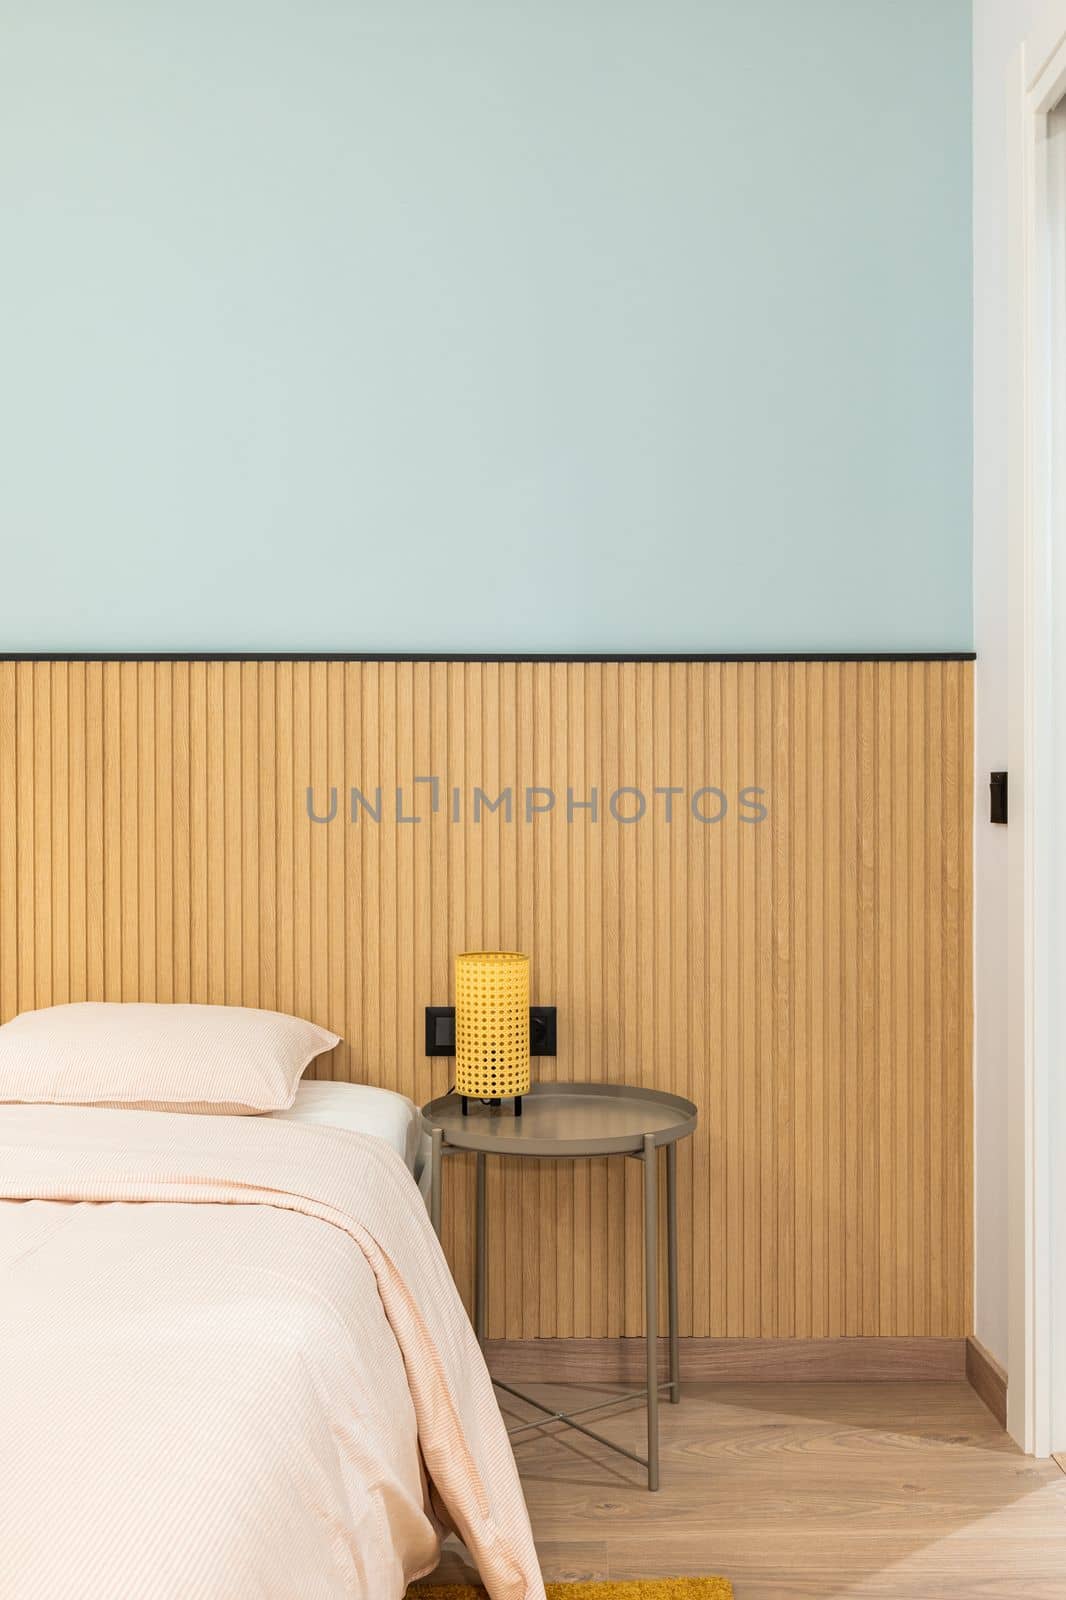 Vertical view of a bed with pillow with large warm duvet and linens in pleasant beige color. Modern design wall with wood paneling. On table is lamp with yellow frame for soft warm light at night. by apavlin